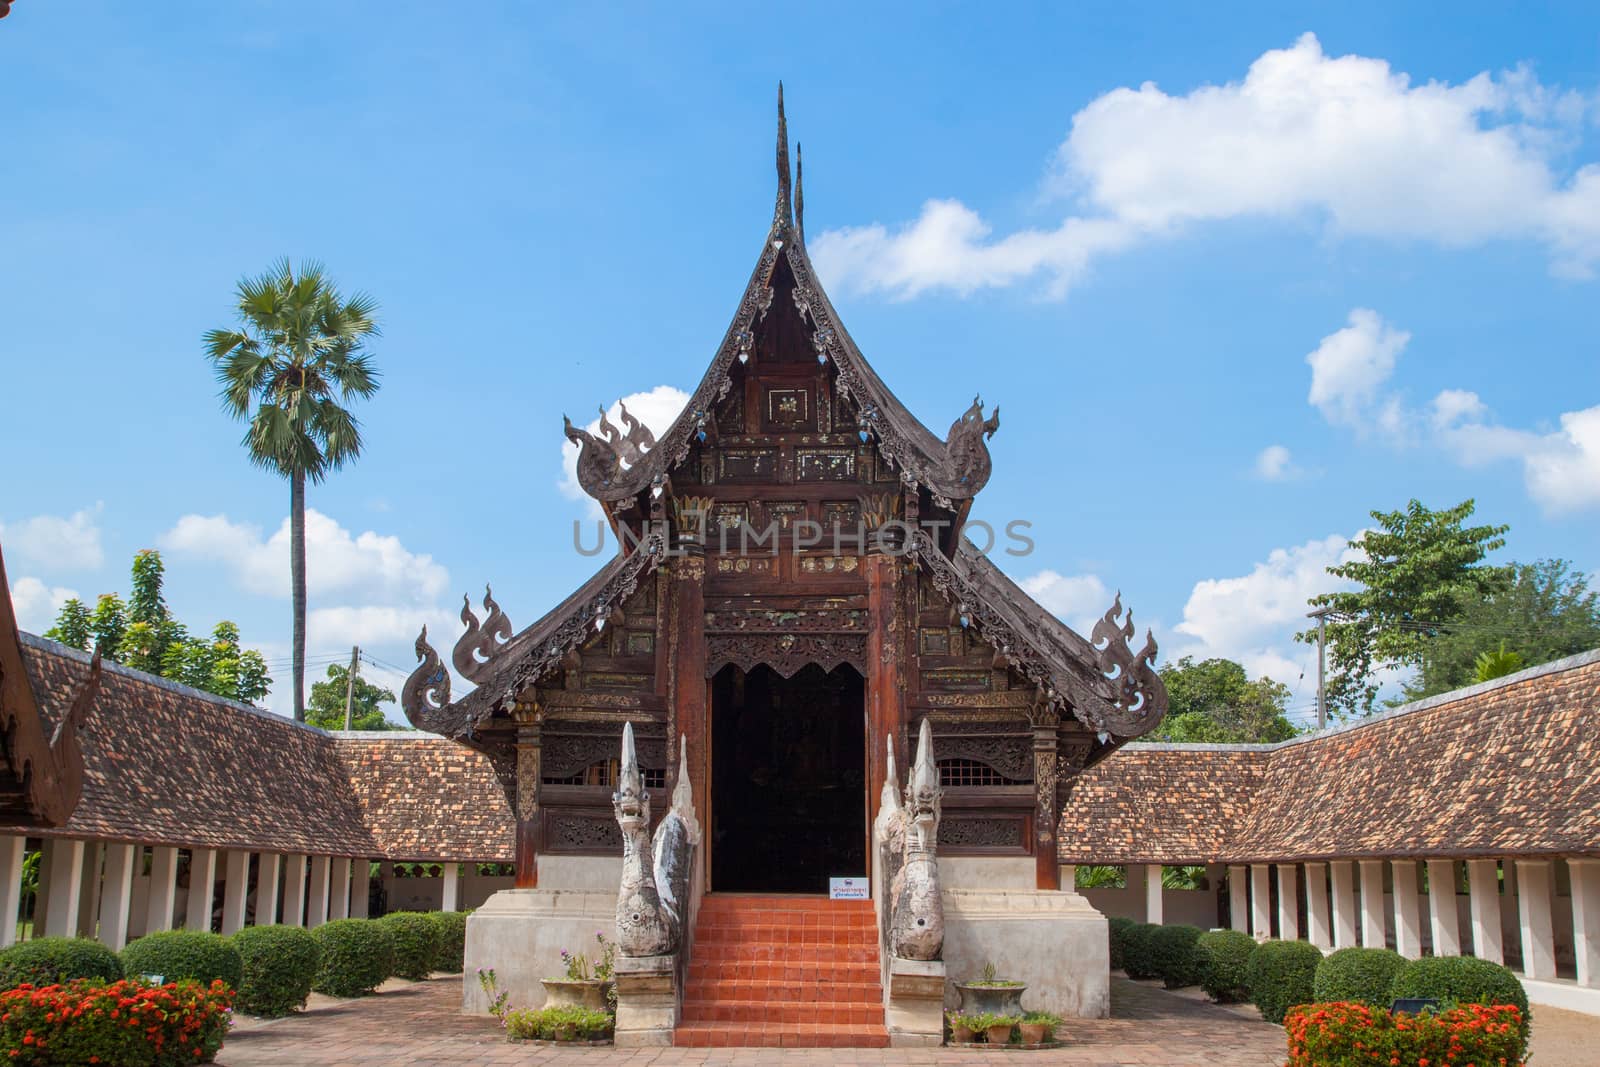 Wat Ton Kain 700 years or Inthrawat temple , popular famous tourist attraction landmark in Chiangmai. Old wooden Thai temple in Chiang Mai Thailand